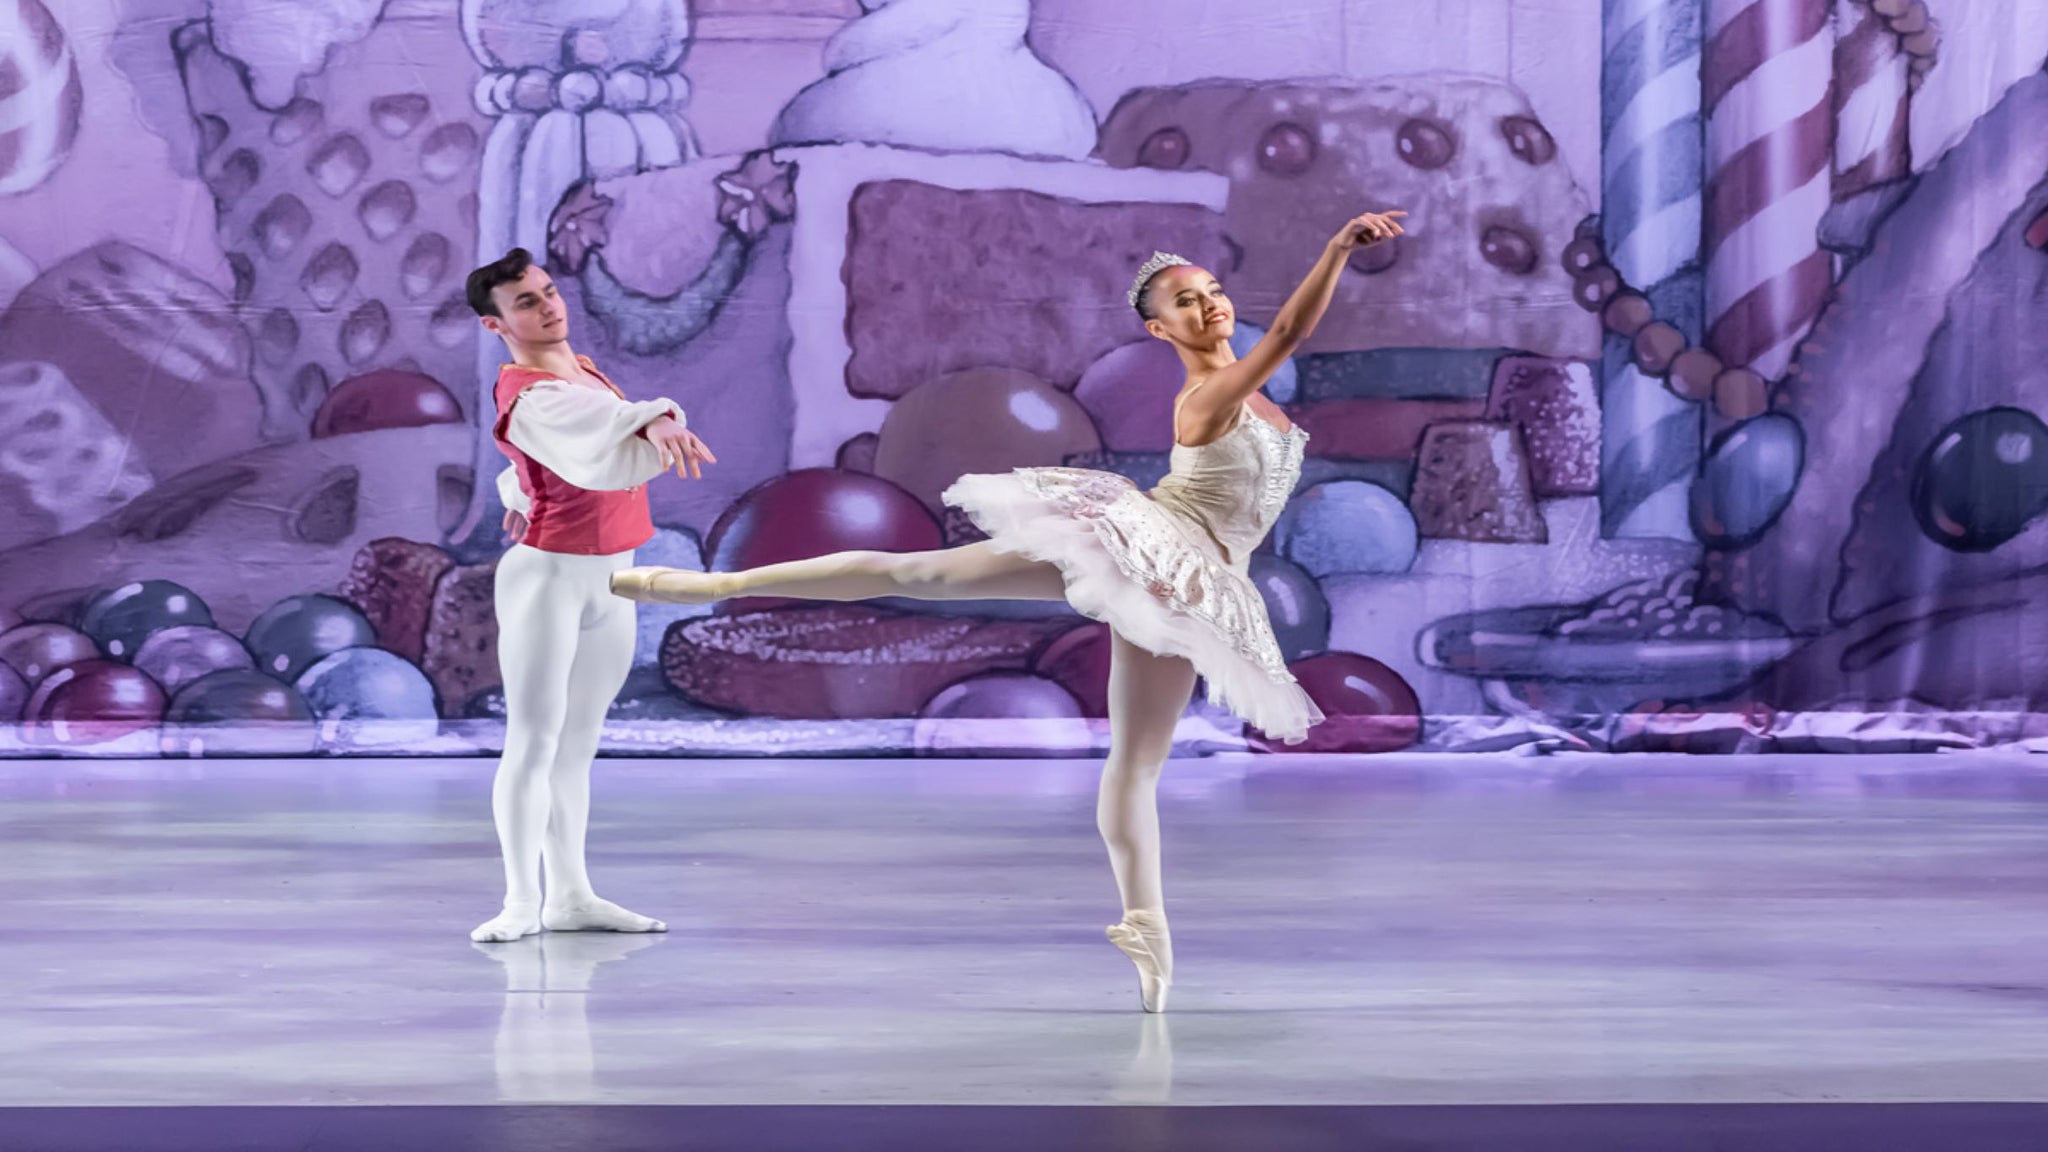 Cary Ballet Company Nutcracker 7:00 Performance presale password for show tickets in Raleigh, NC (Martin Marietta Center for the Performing Arts (fka Duke Energy))